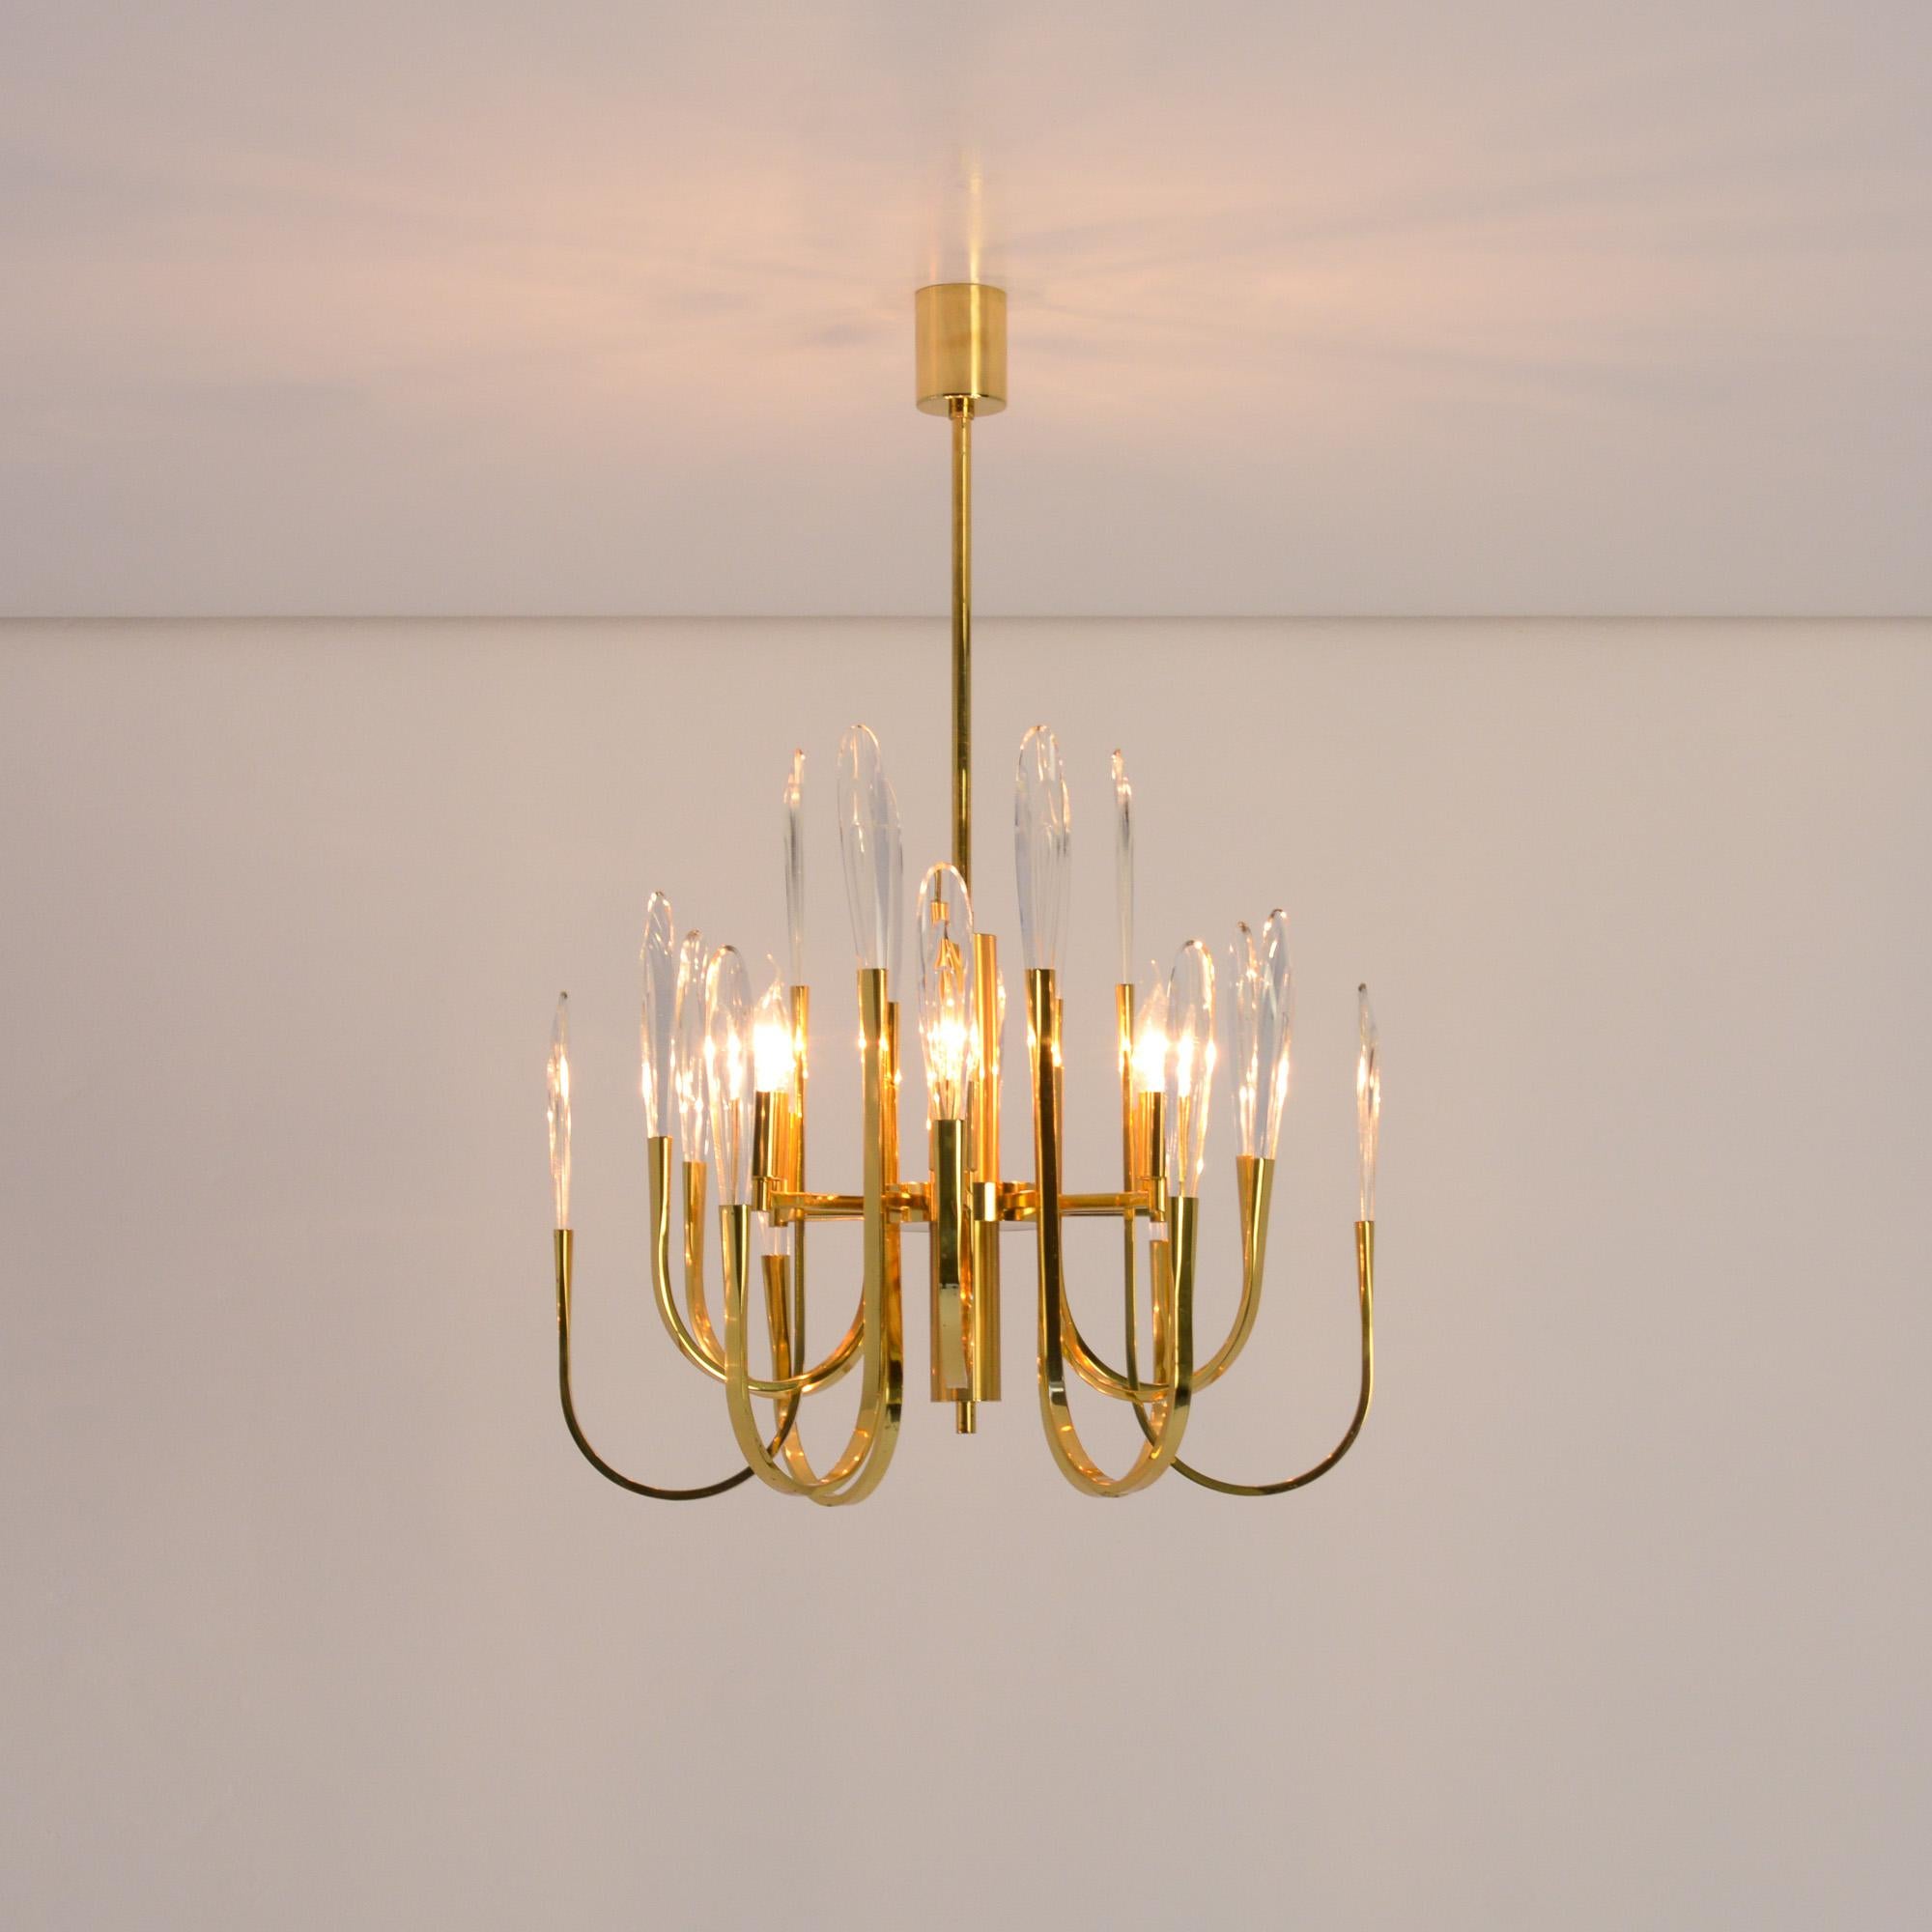 This classical chandelier was created and manufactured by Boulanger in Belgium.
This high quality made chandelier in brass is finished with crystal glass leaves that create a fairylike effect.
It is an amazing chandelier in very good condition and